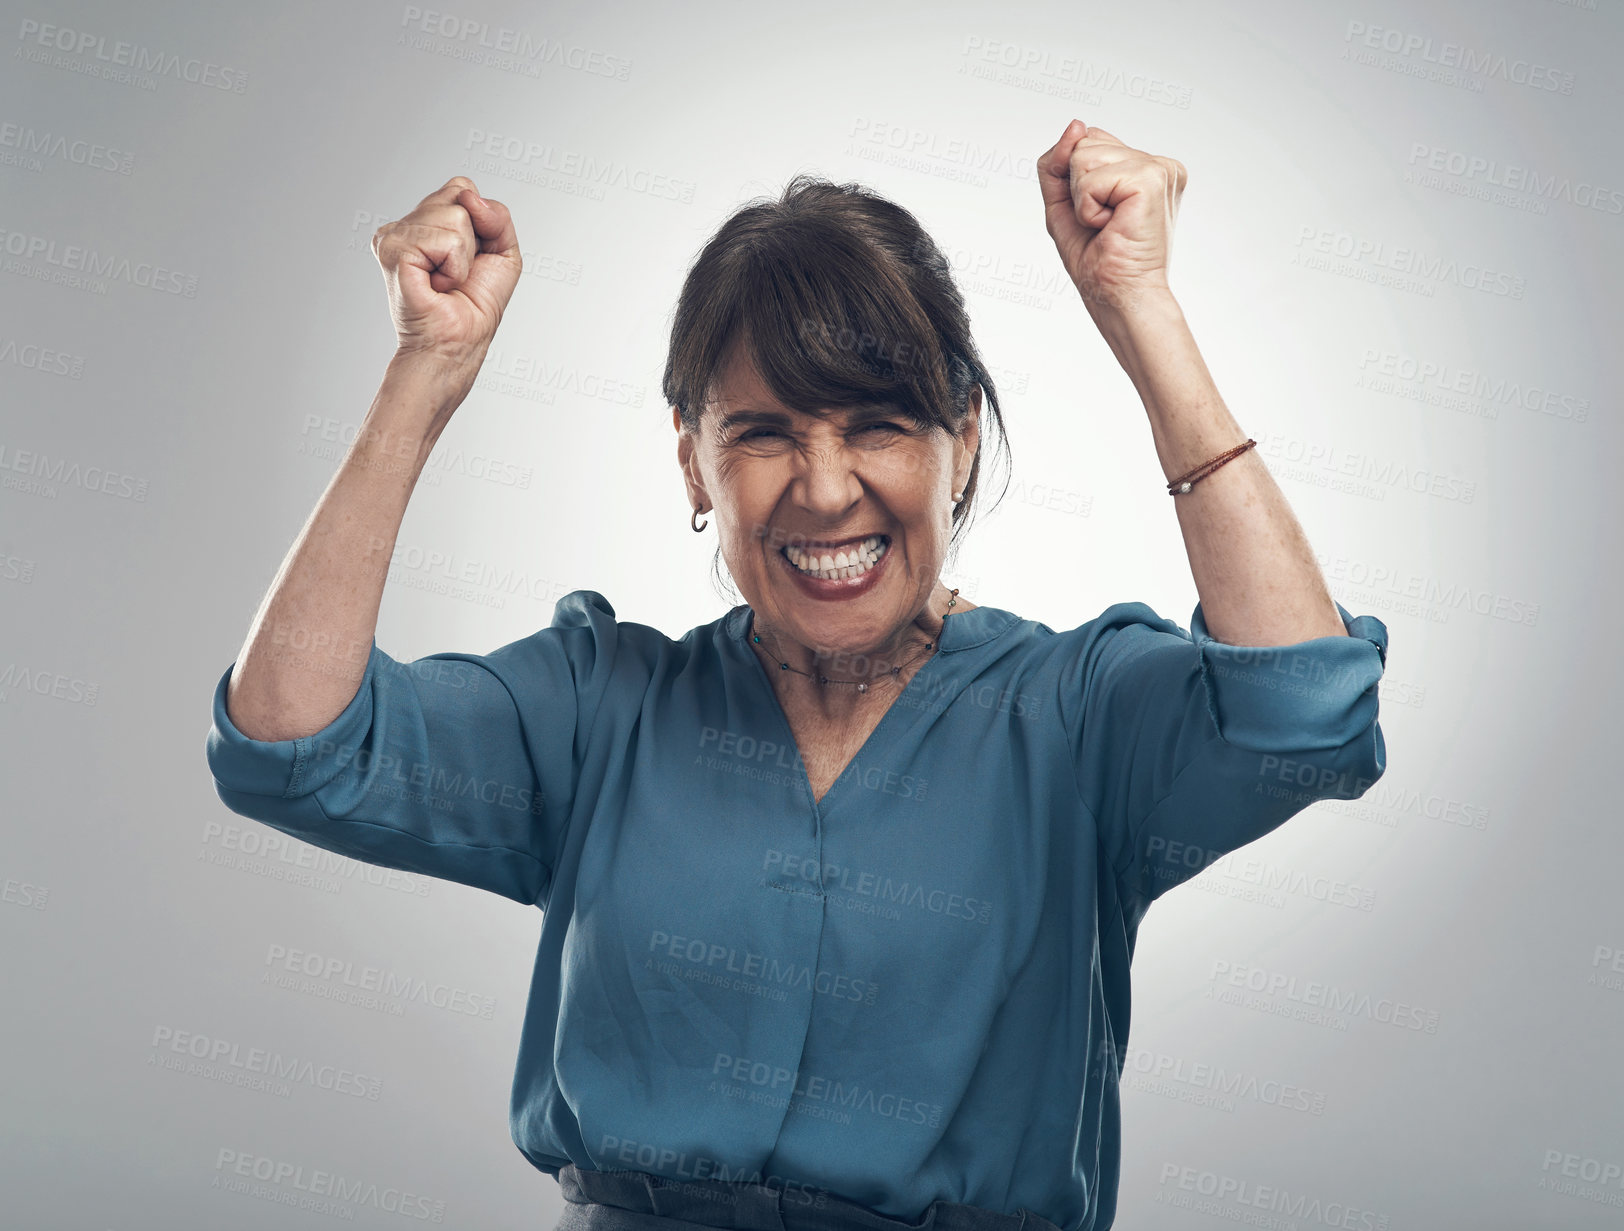 Buy stock photo Studio portrait of a senior woman cheering against a grey background